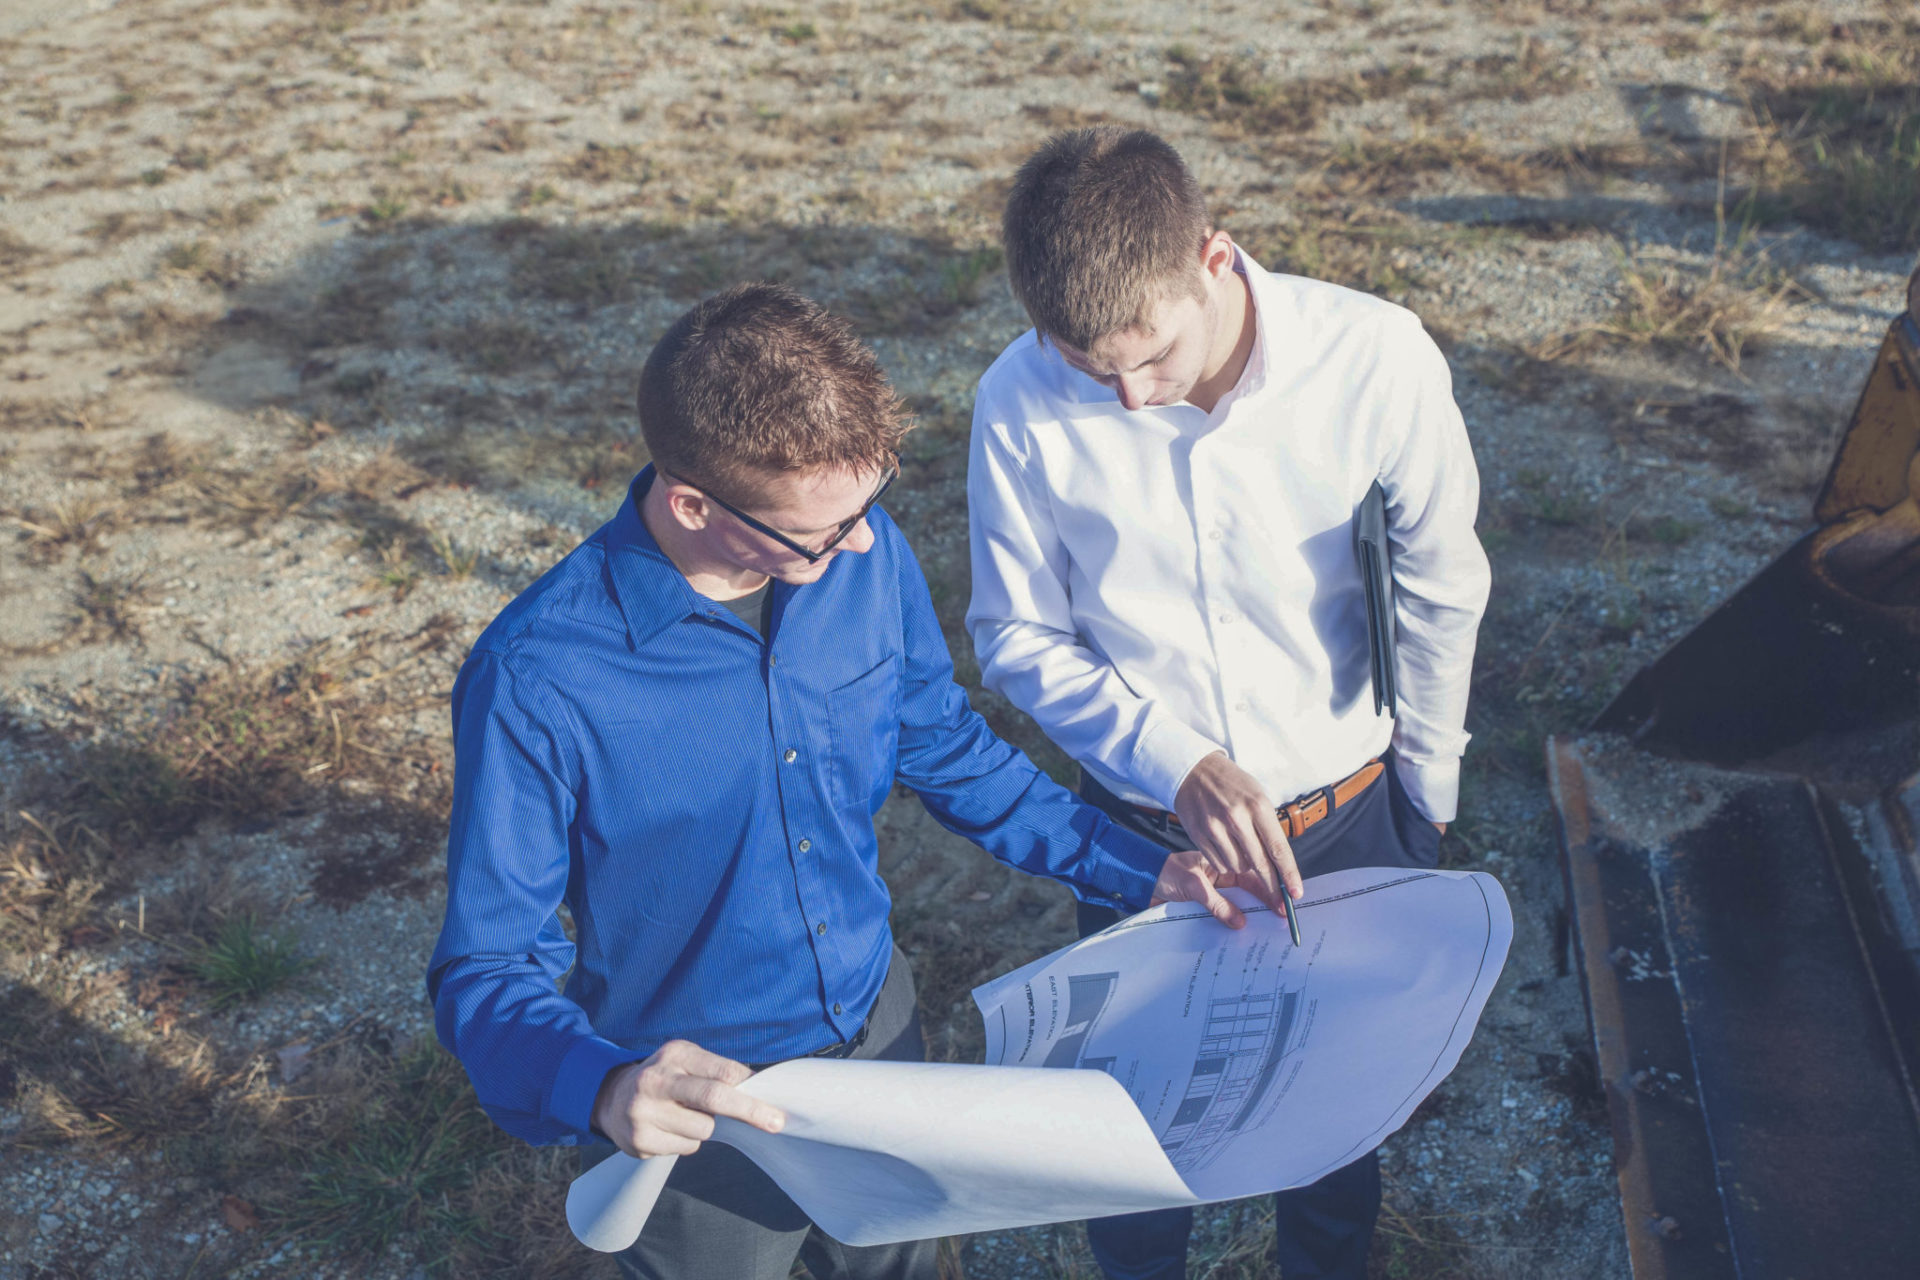 Image showing two men standing in a field reviewing construction plans.